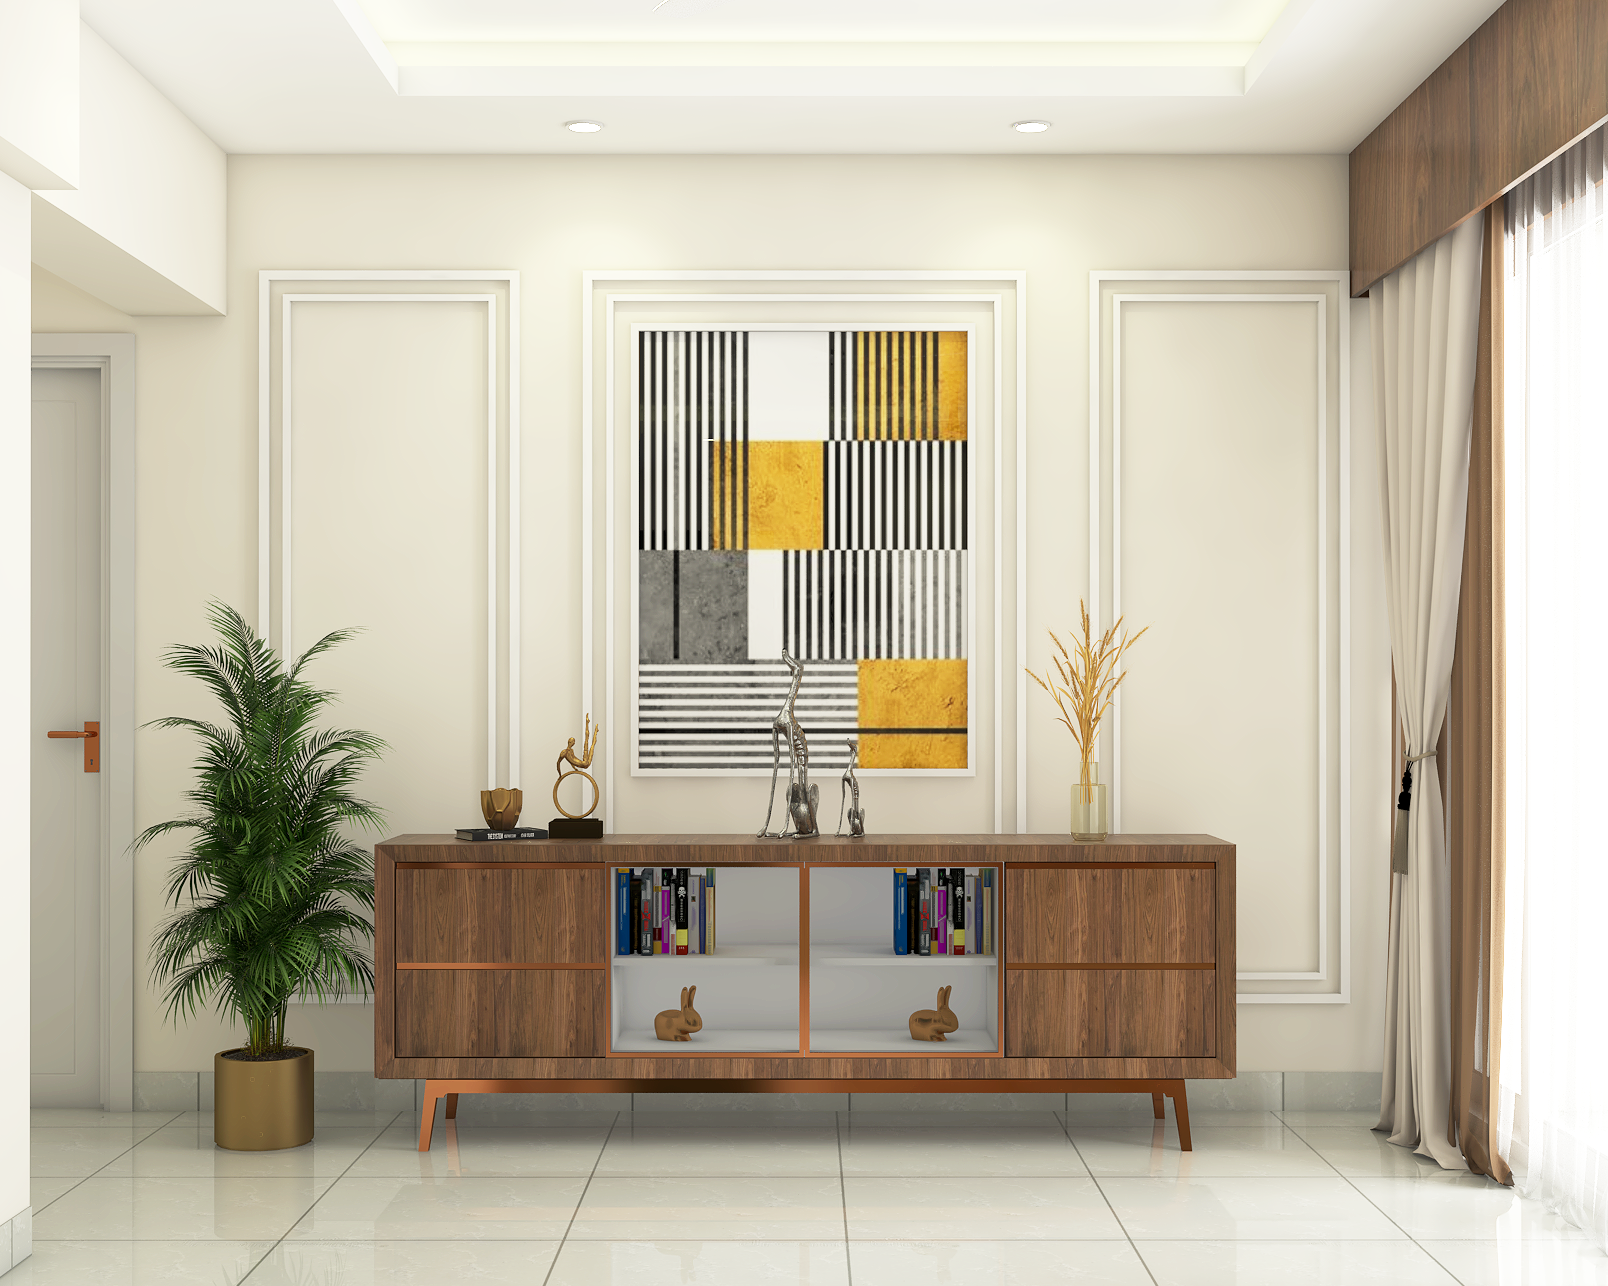 Contemporary Foyer Design With Storage Unit